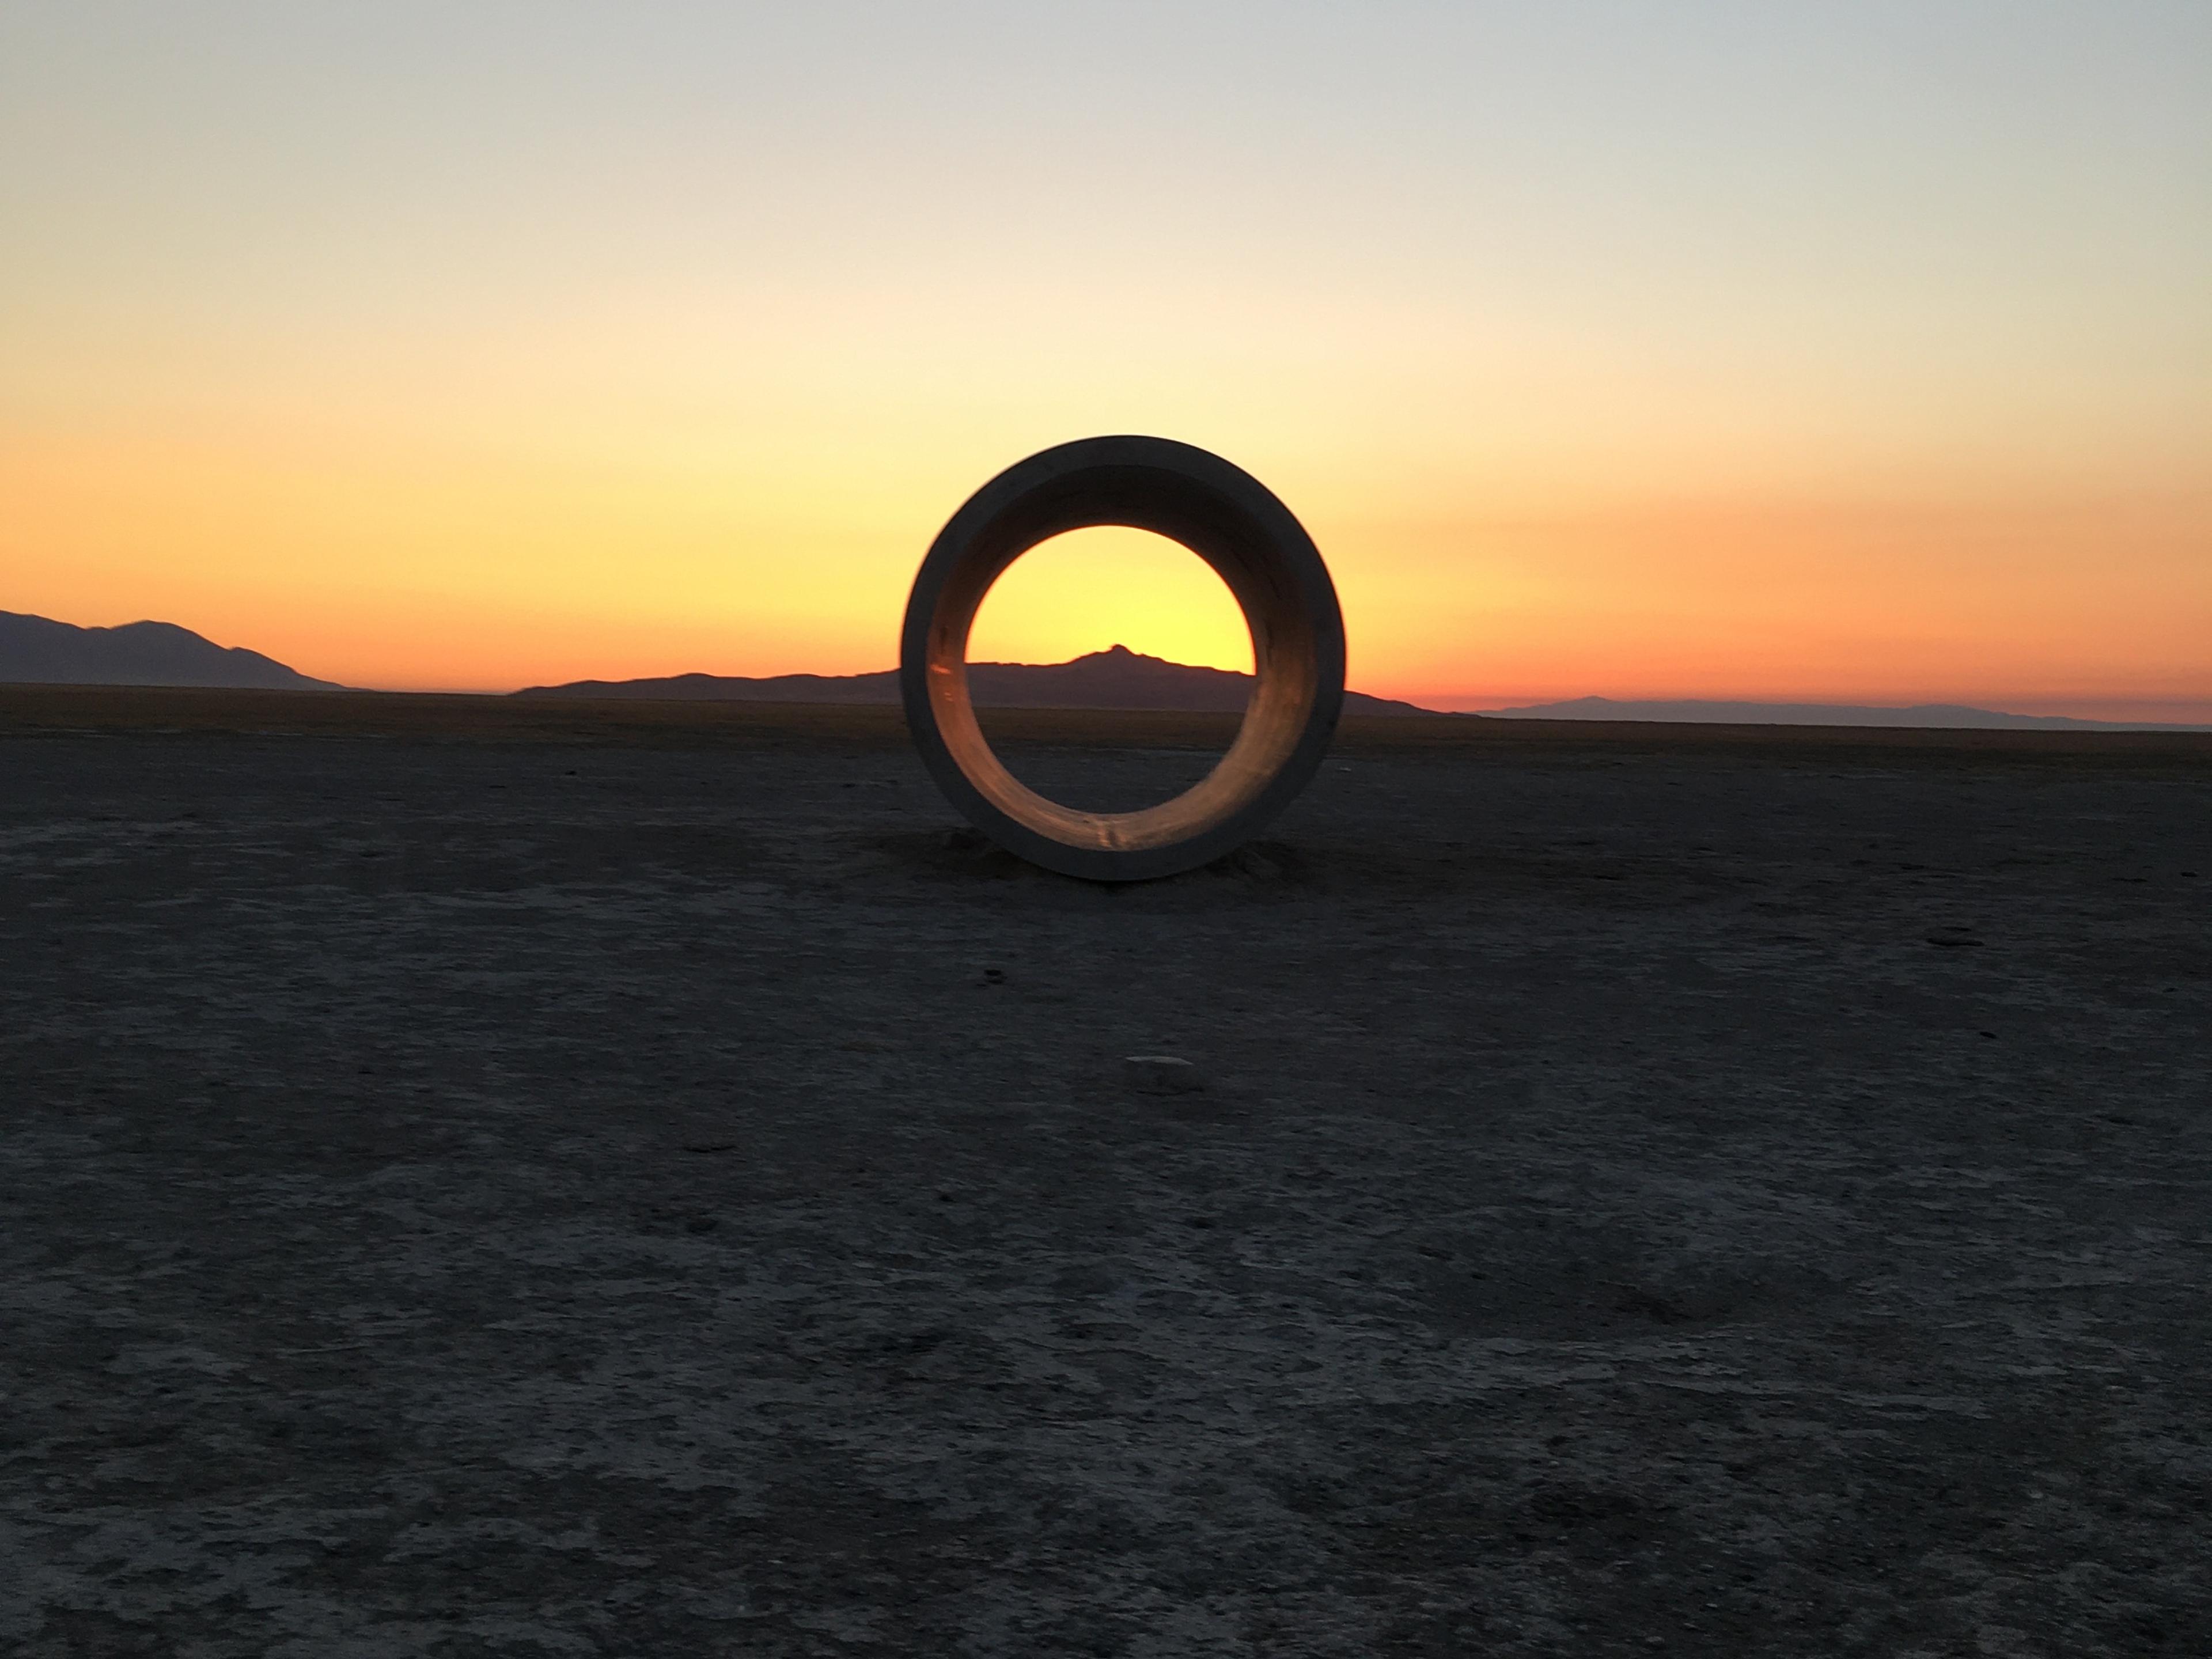 Landscape with sunsetting, large tunnel sculpture framing is central in the frame framing a peak in the distance. 